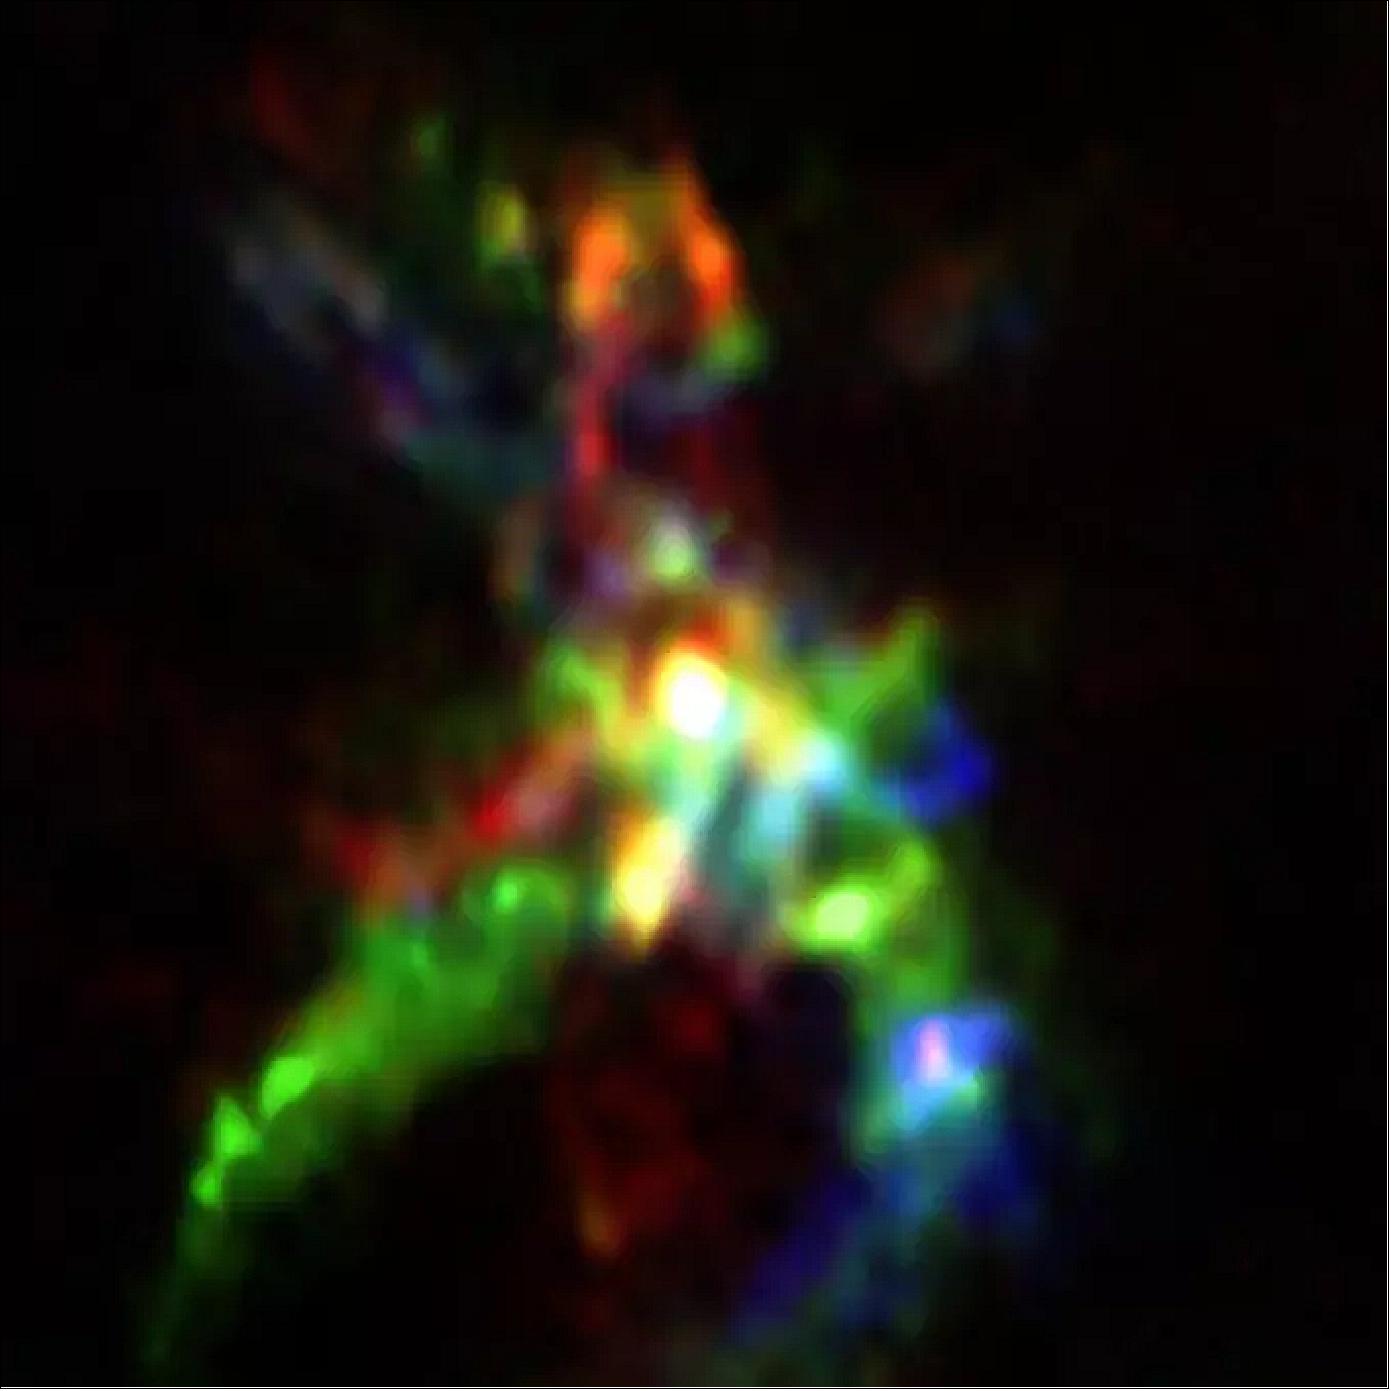 Figure 73: This ALMA image shows a detailed view of the star-forming region AFGL 5142. A bright, massive star in its infancy is visible at the center of the image. The flows of gas from this star have opened up a cavity in the region, and it is in the walls of this cavity (shown in color), that phosphorus-bearing molecules like phosphorus monoxide are formed. The different colors represent material moving at different speeds (image credit: ALMA (ESO/NAOJ/NRAO), Rivilla et al.)